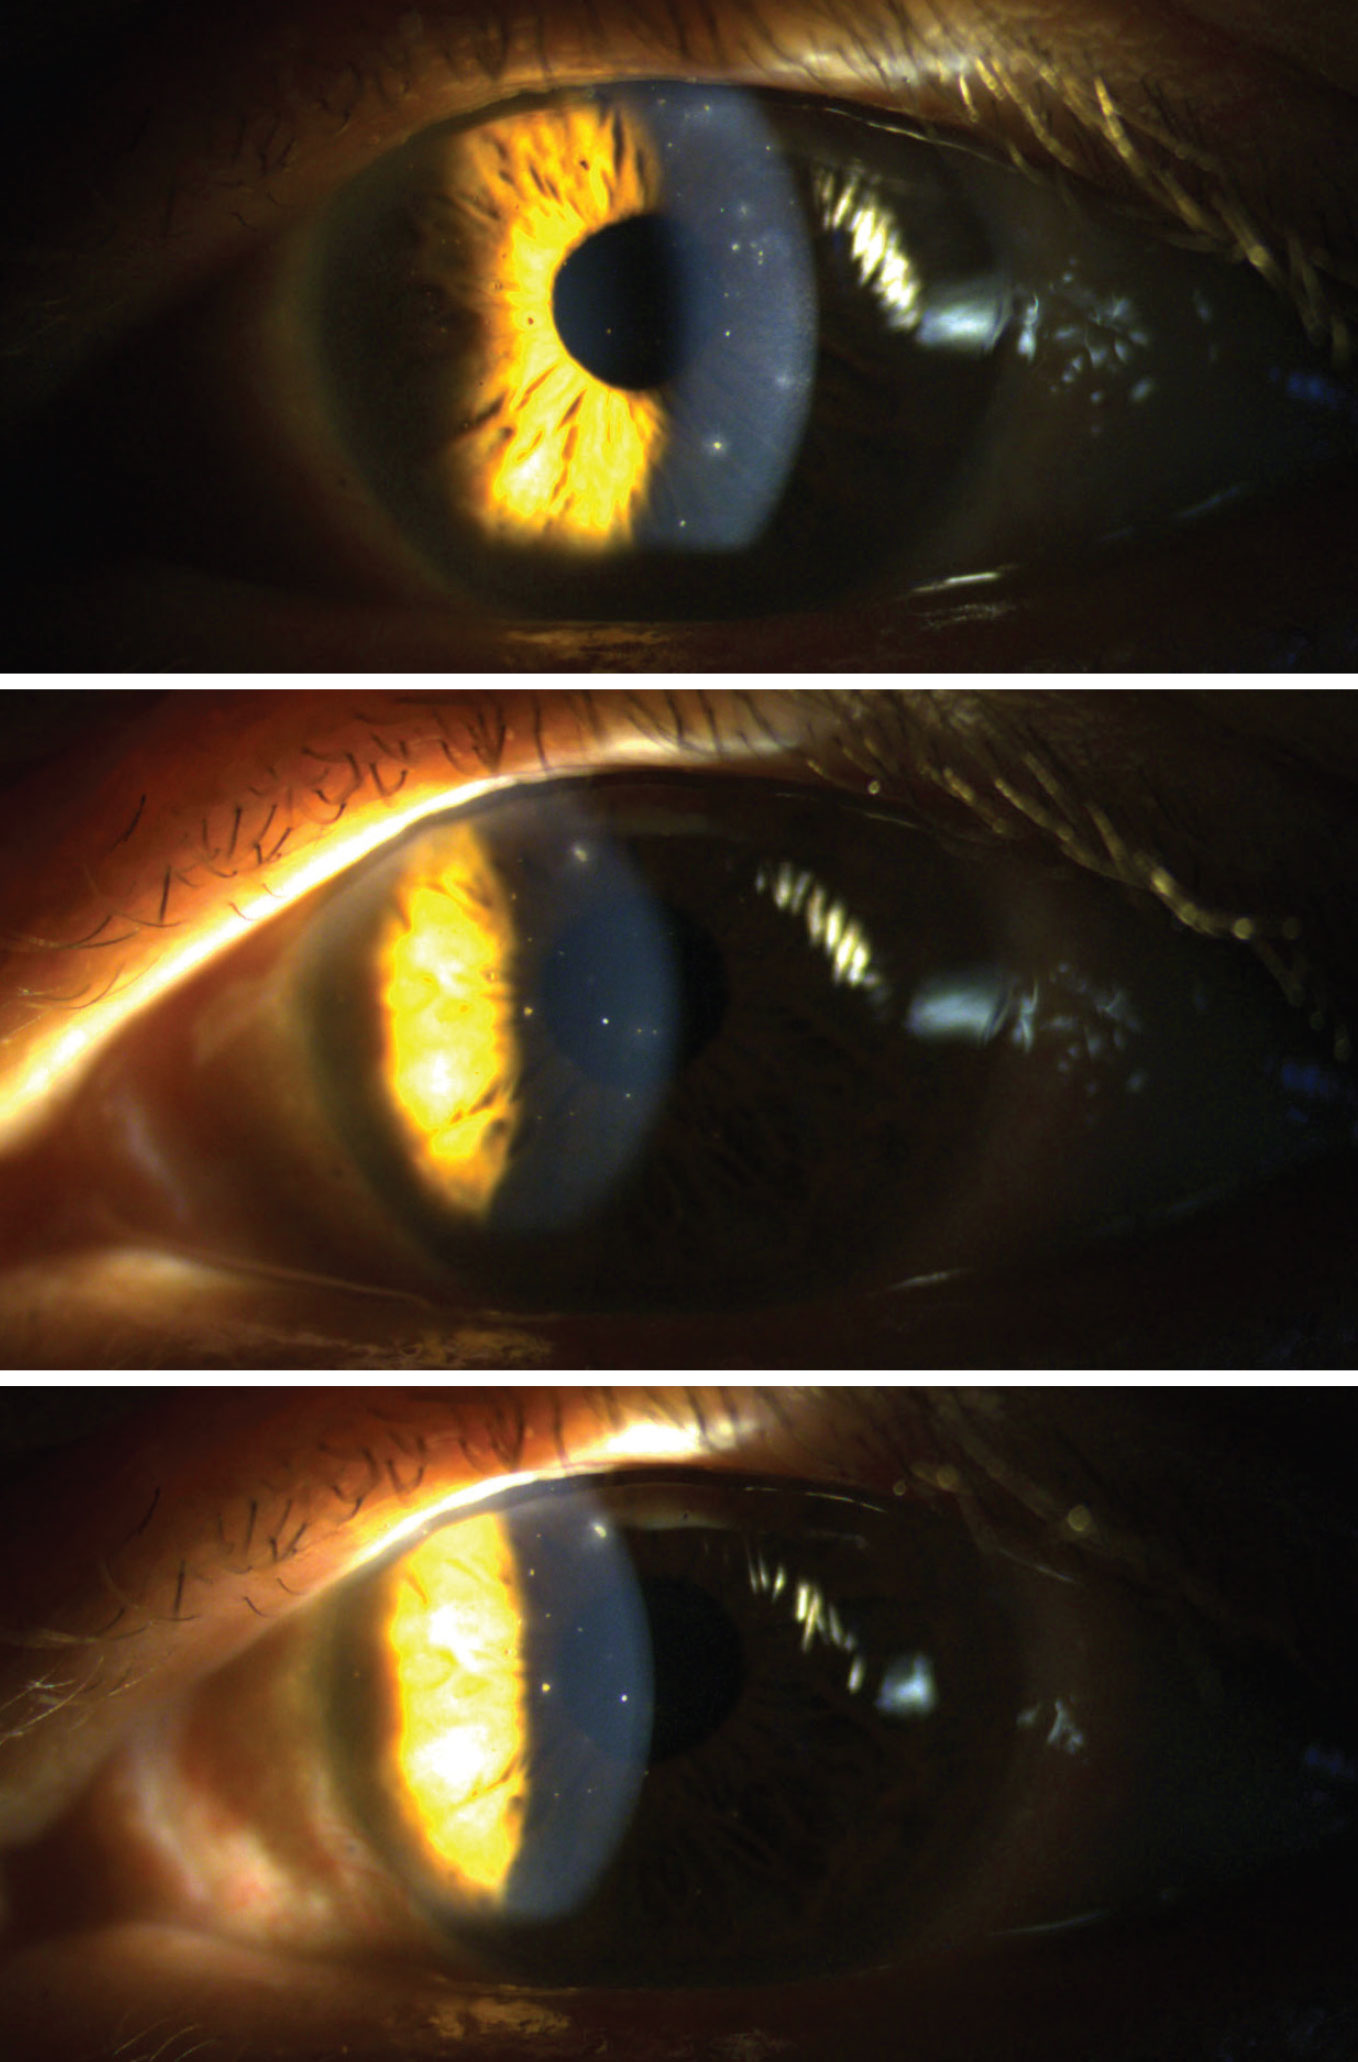 Embedded corneal foreign bodies of differing material scattered throughout the left cornea.